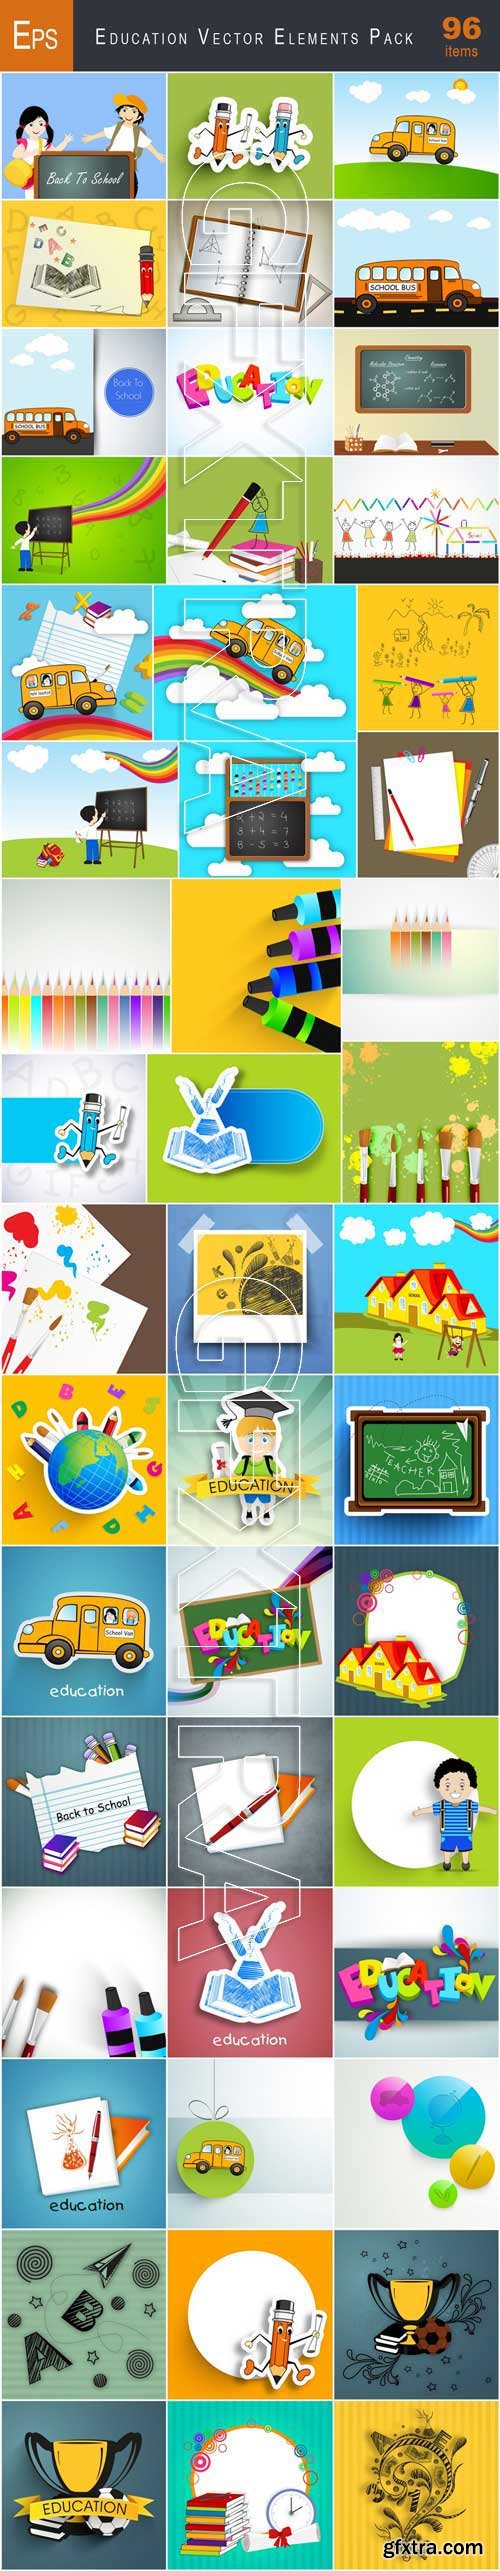 VectorCity Education Vector Elements Pack